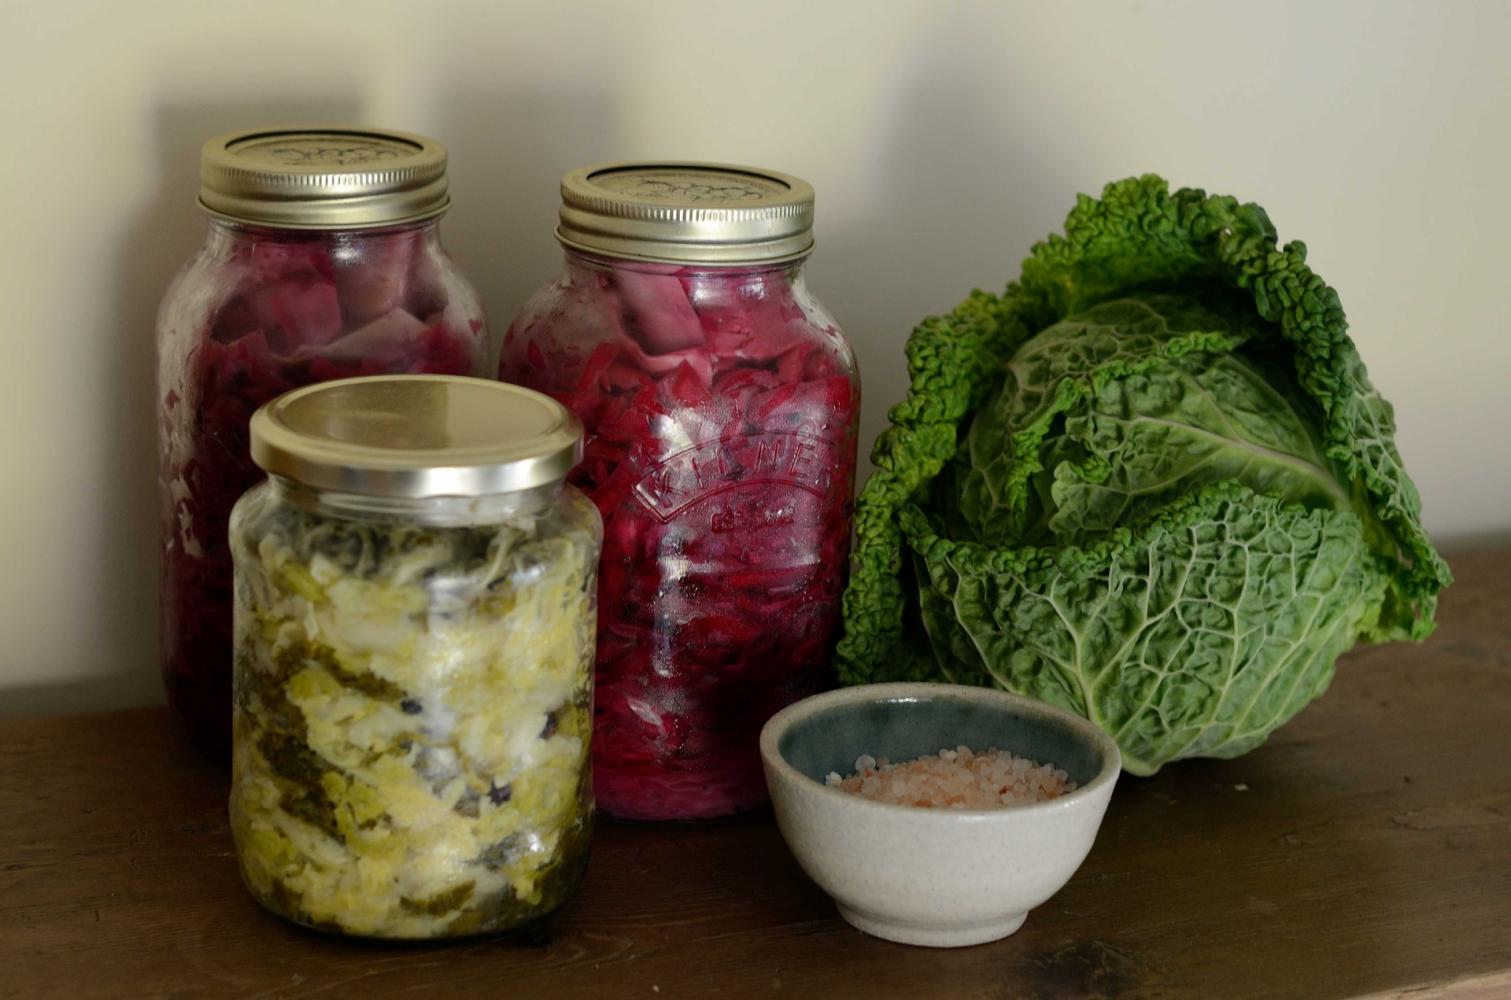 Fermentation as preparation for the winter - check it out!